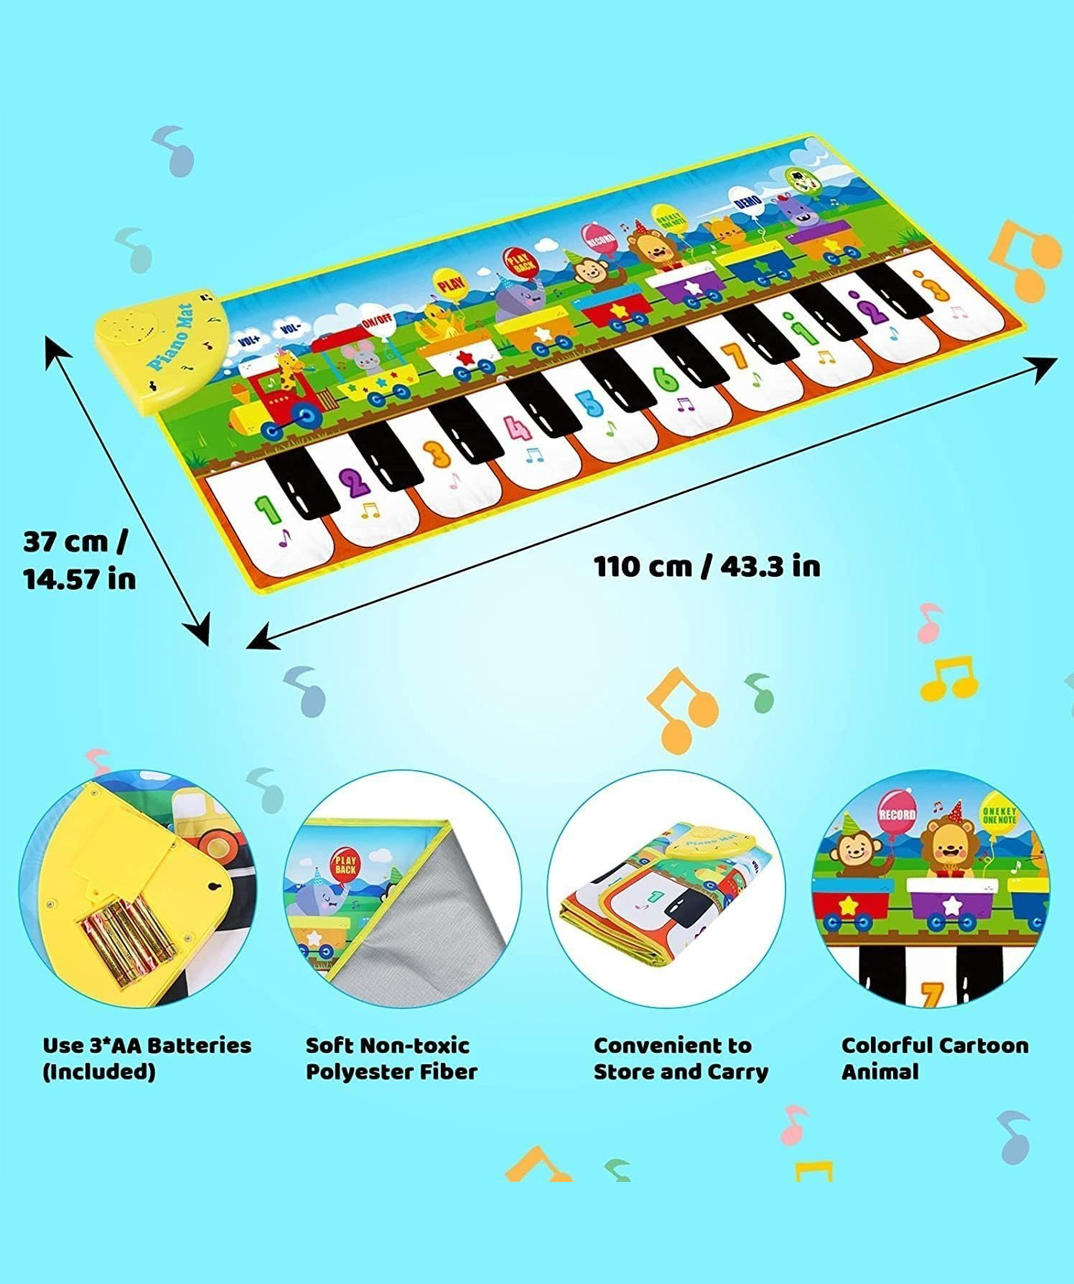 Germany. toy №118 musical playmat